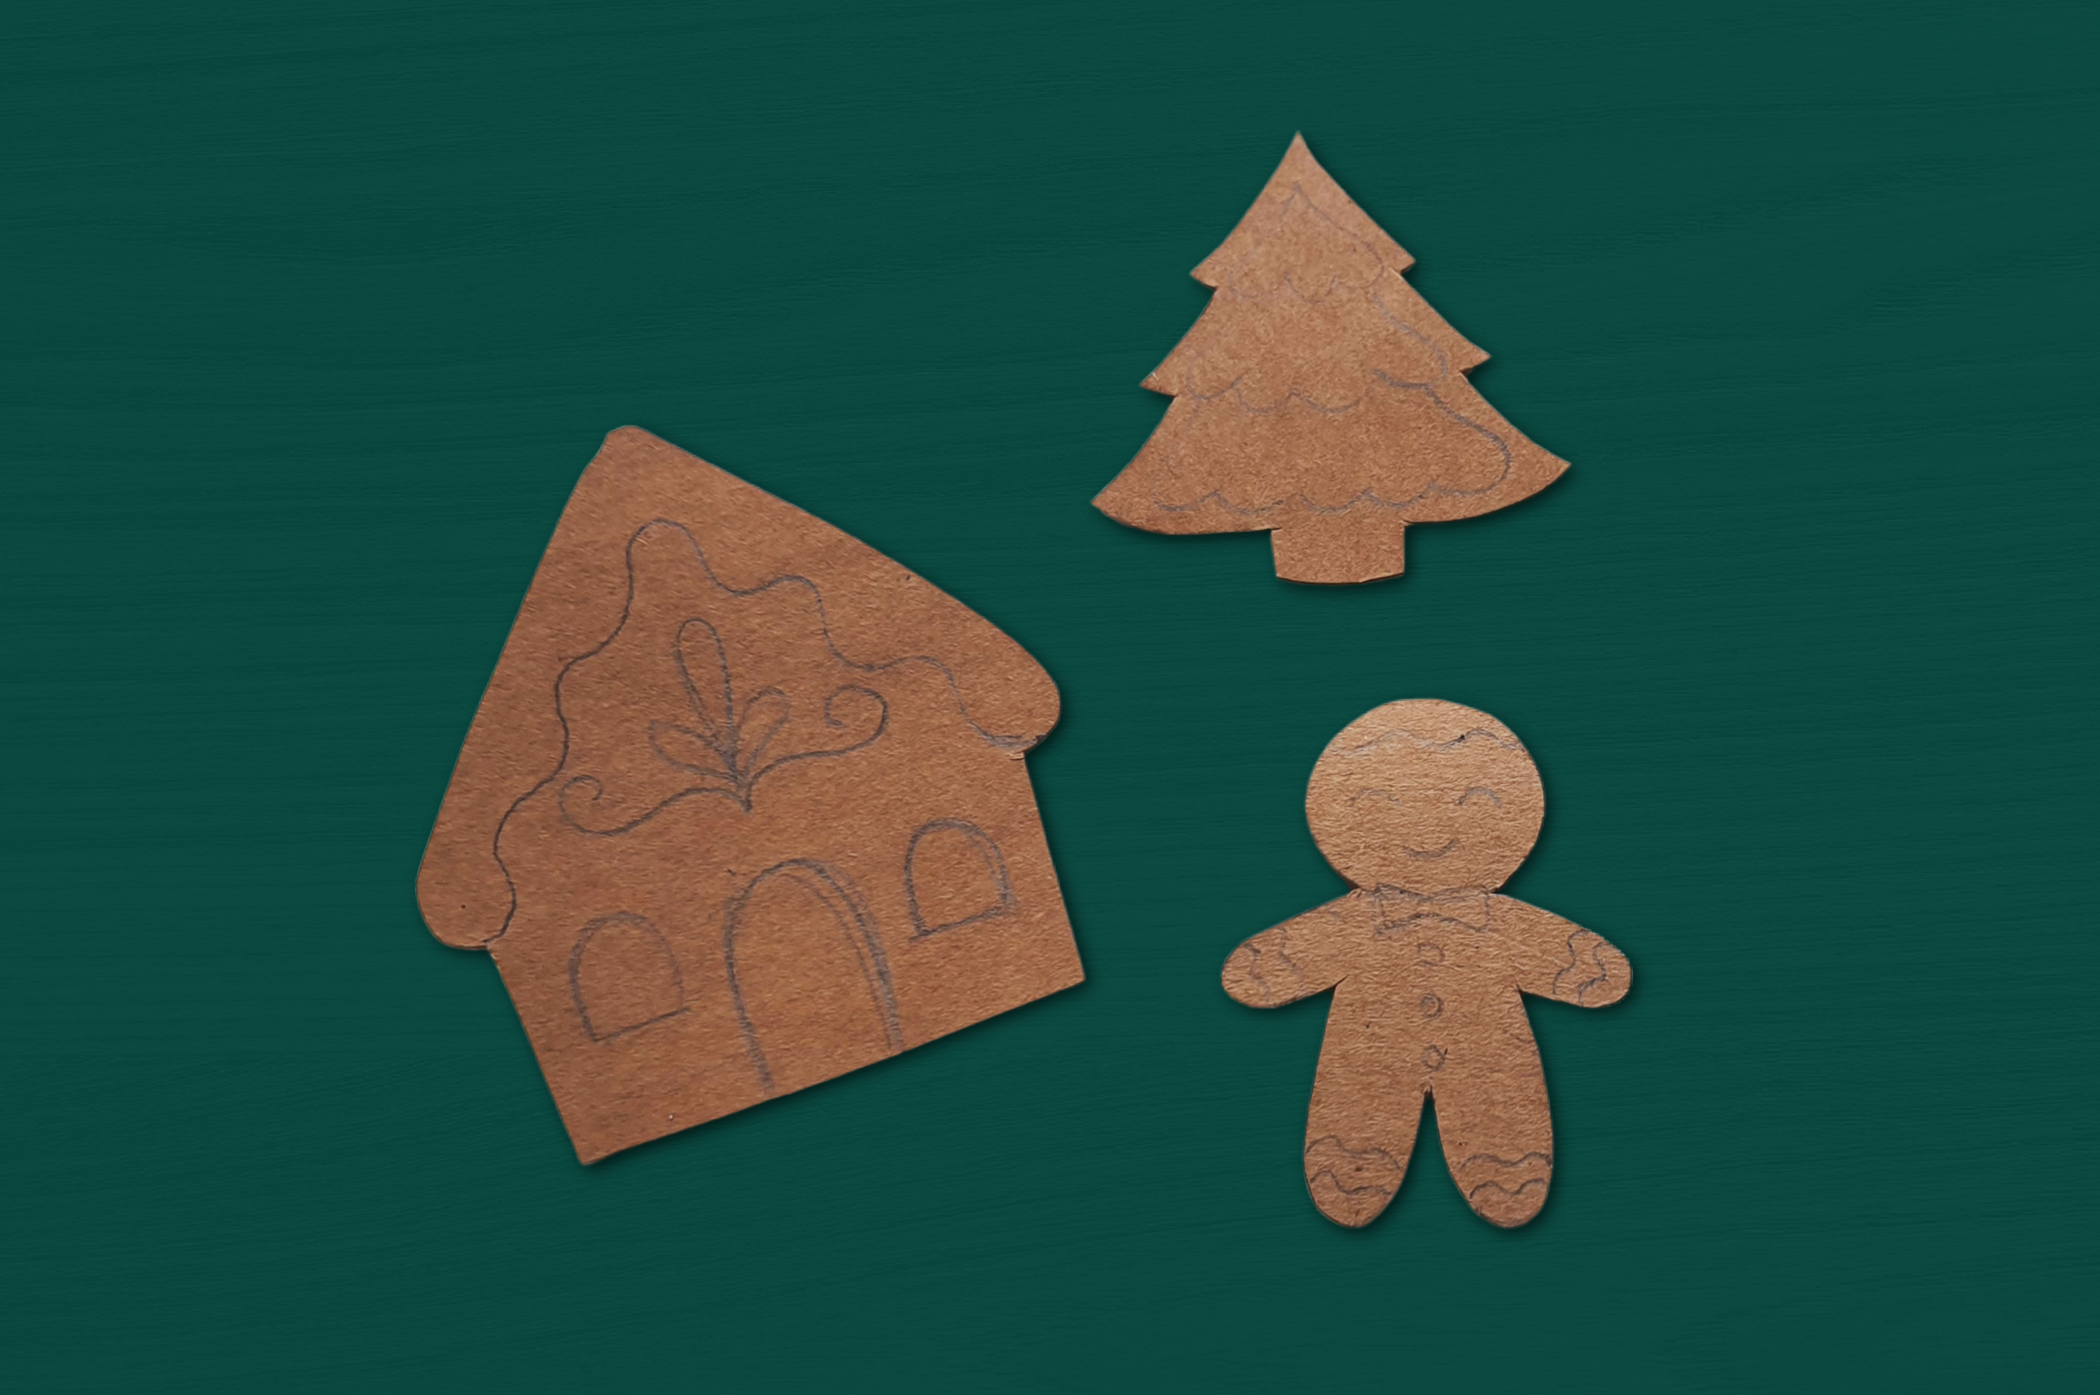 undecorated paper gingerbread ornaments with designs sketched in pencil